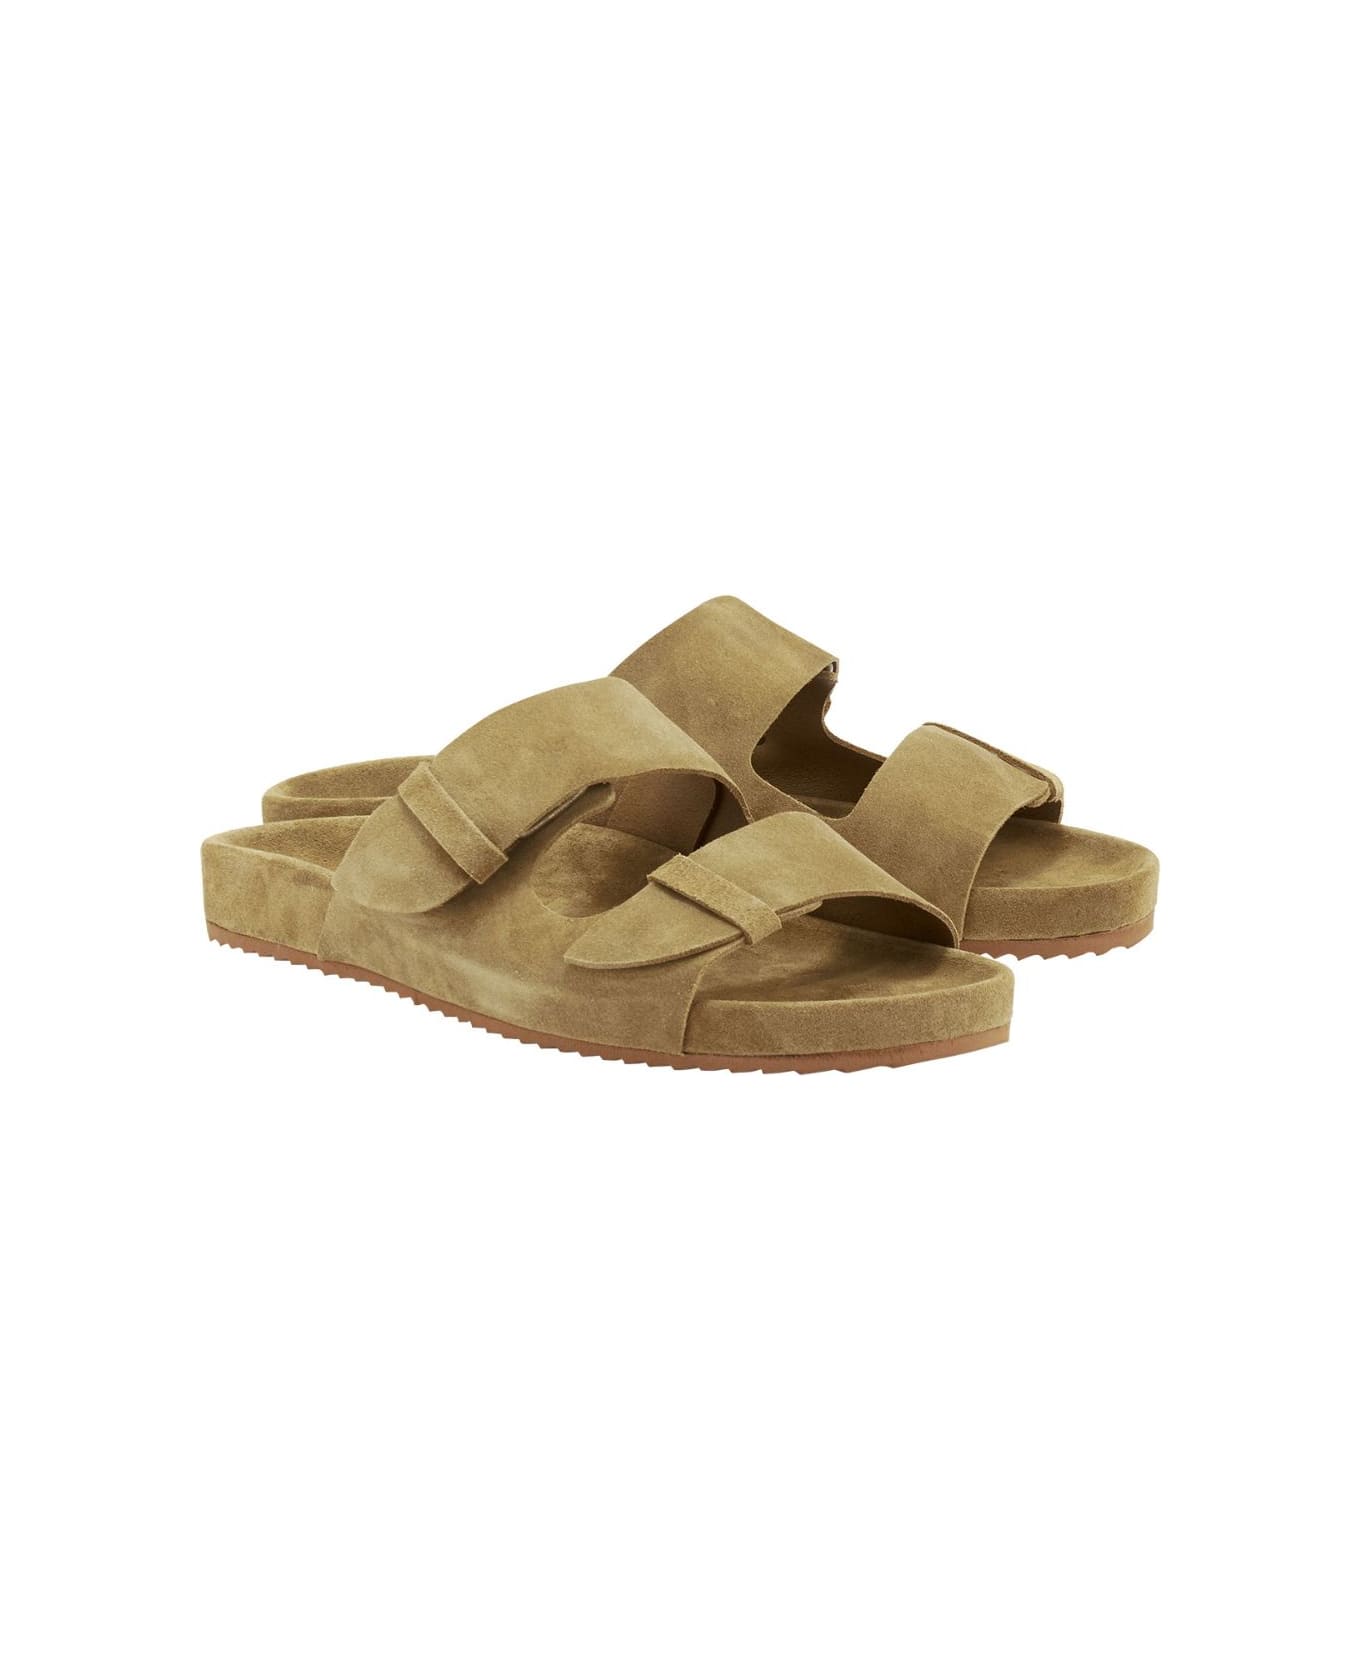 Ancient Greek Sandals Diogenis Sandals - Military その他各種シューズ